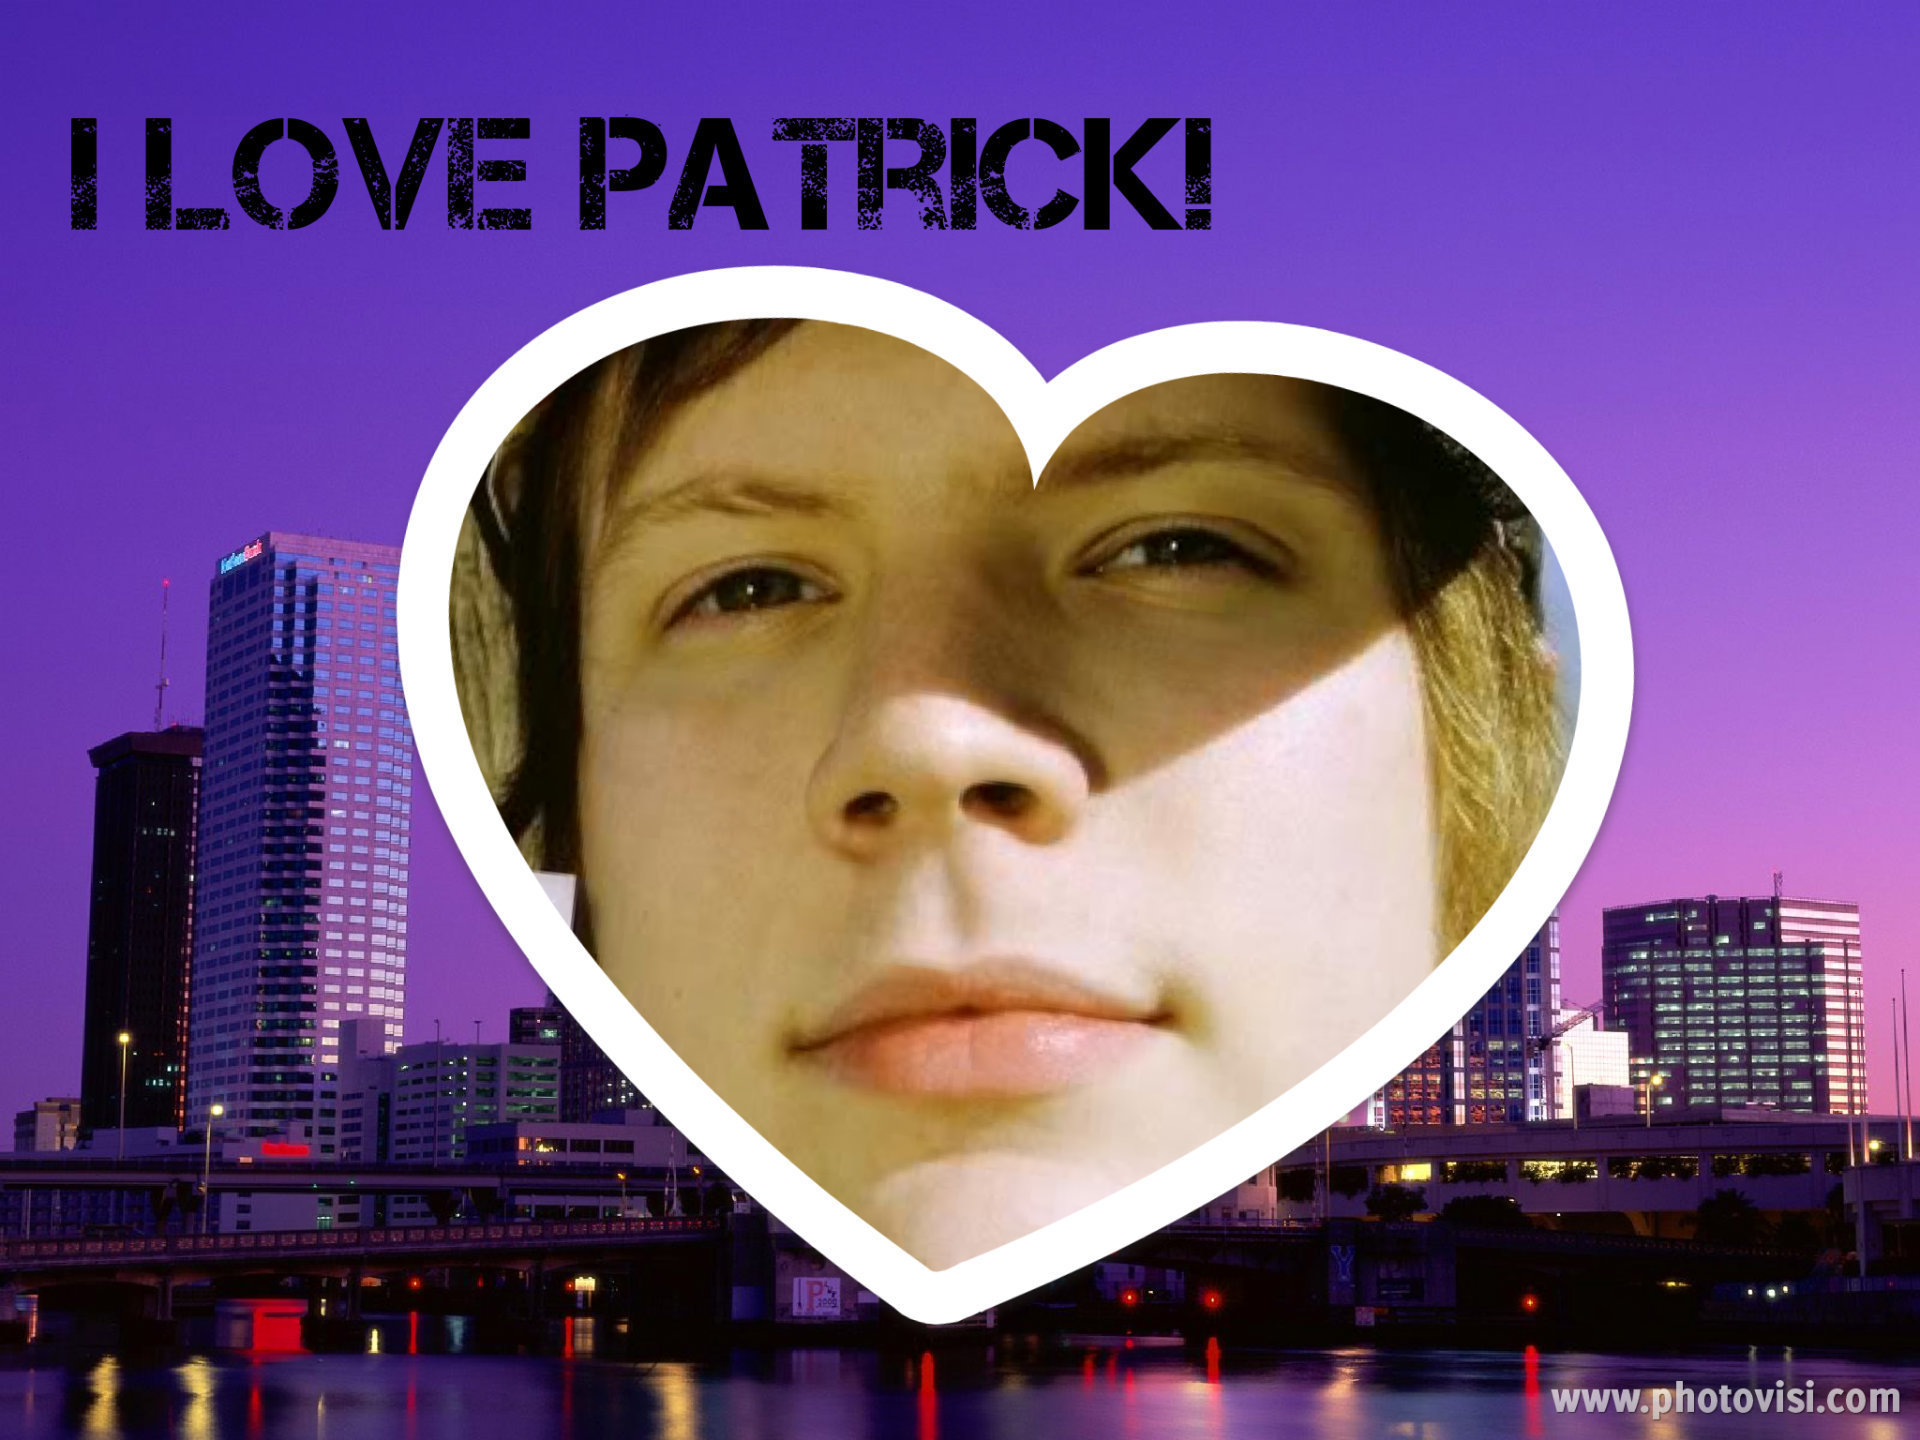 16falloutboy I Love Patrick, and he&#39;s mine so STAY AWAY! - I-Love-Patrick-and-he-s-mine-so-STAY-AWAY-16falloutboy-18904016-1920-1440